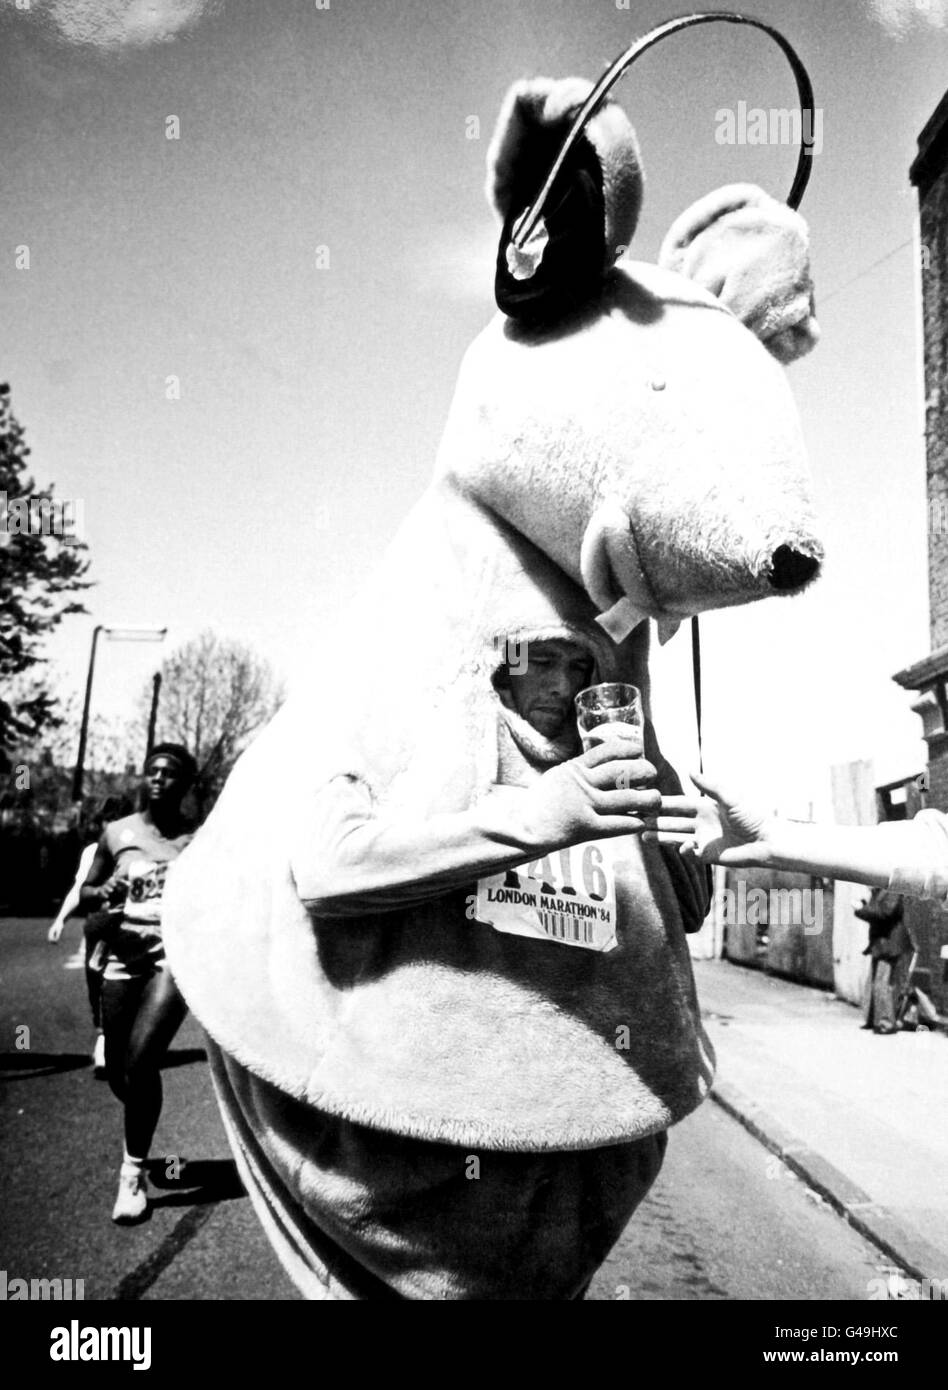 A runner in costume drinking a pint of beer during the London Marathon Stock Photo